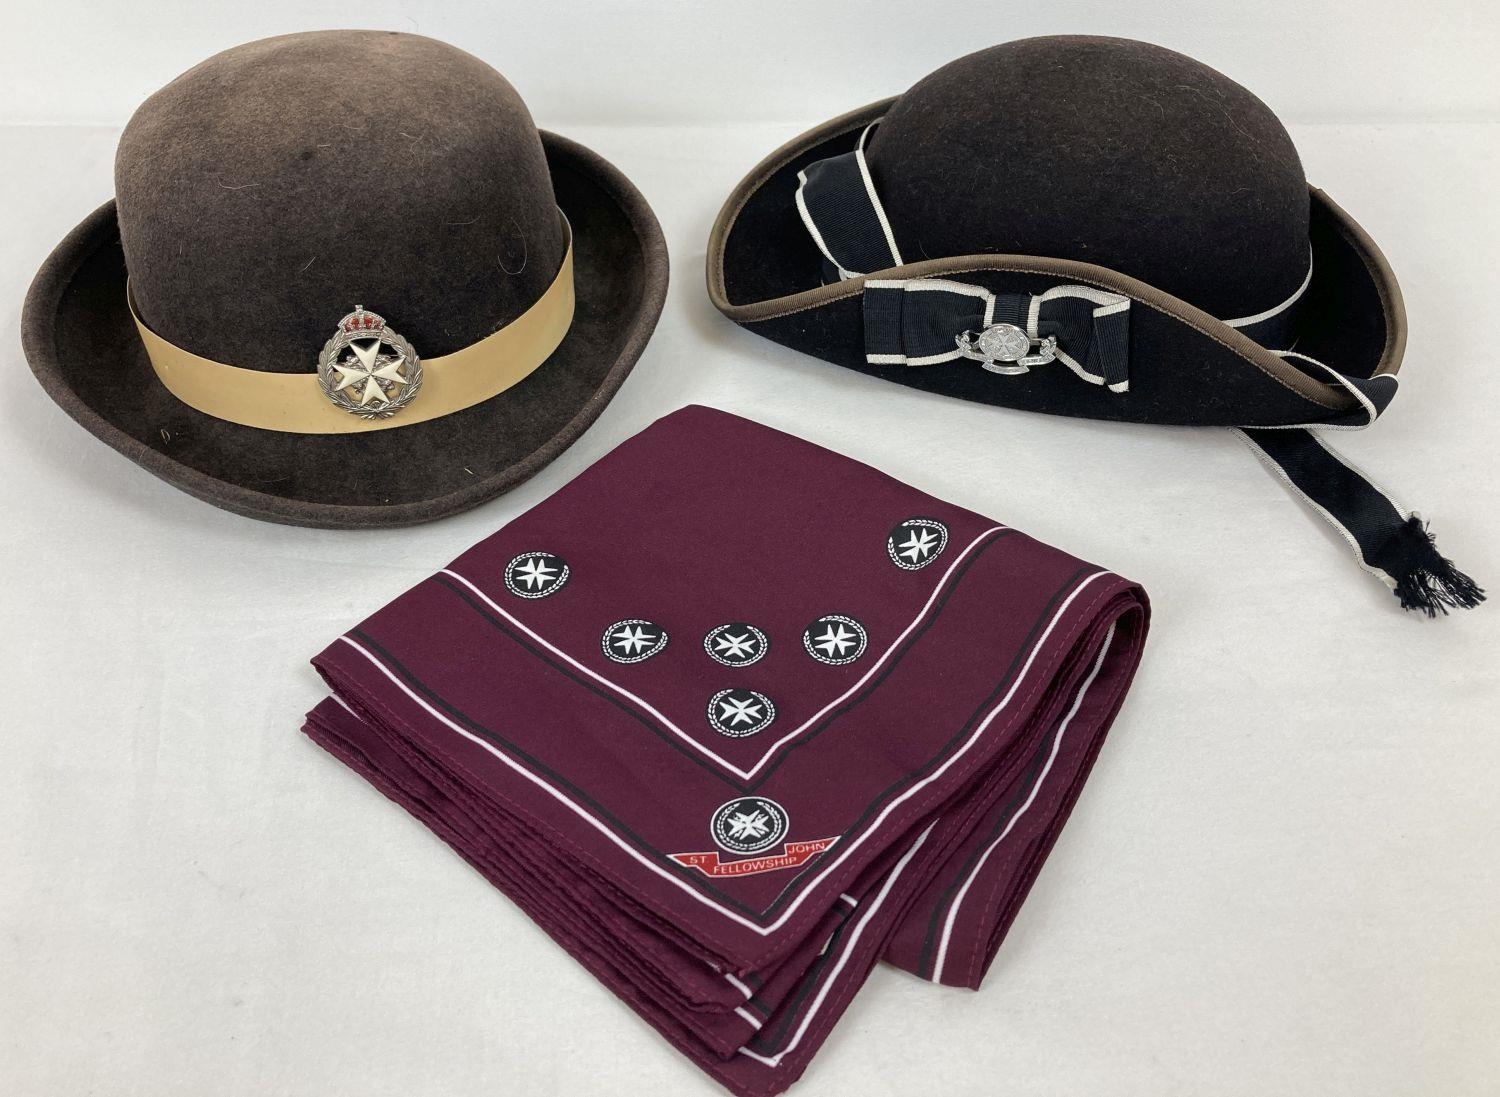 2 vintage Salvation Army uniform hats complete with metal badges to front together with a maroon,